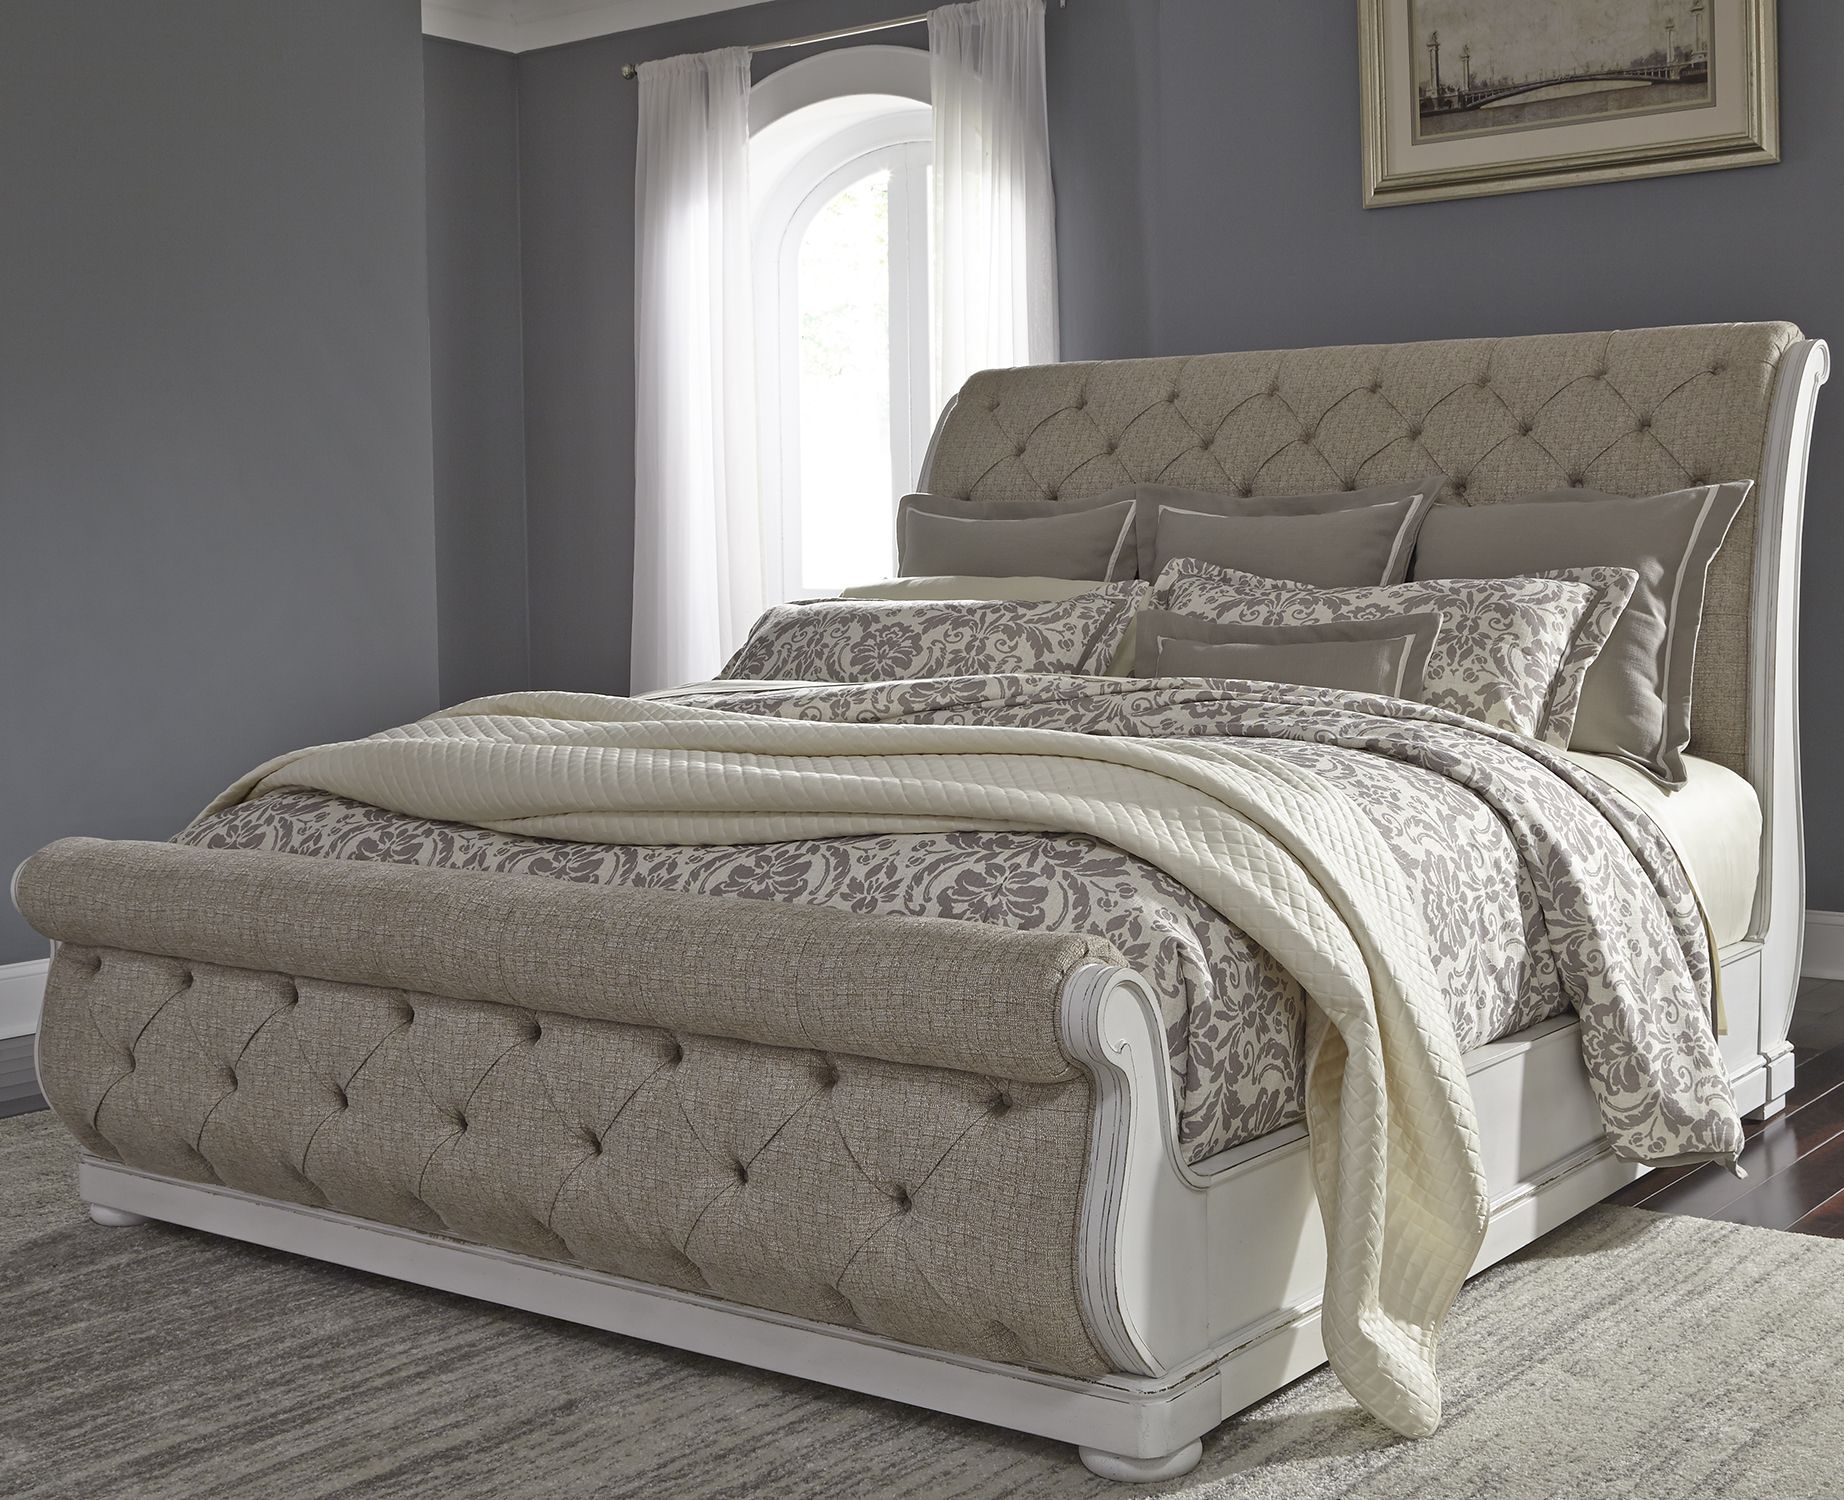 Abbey Park Antique White Queen, Willenburg King Upholstered Bed